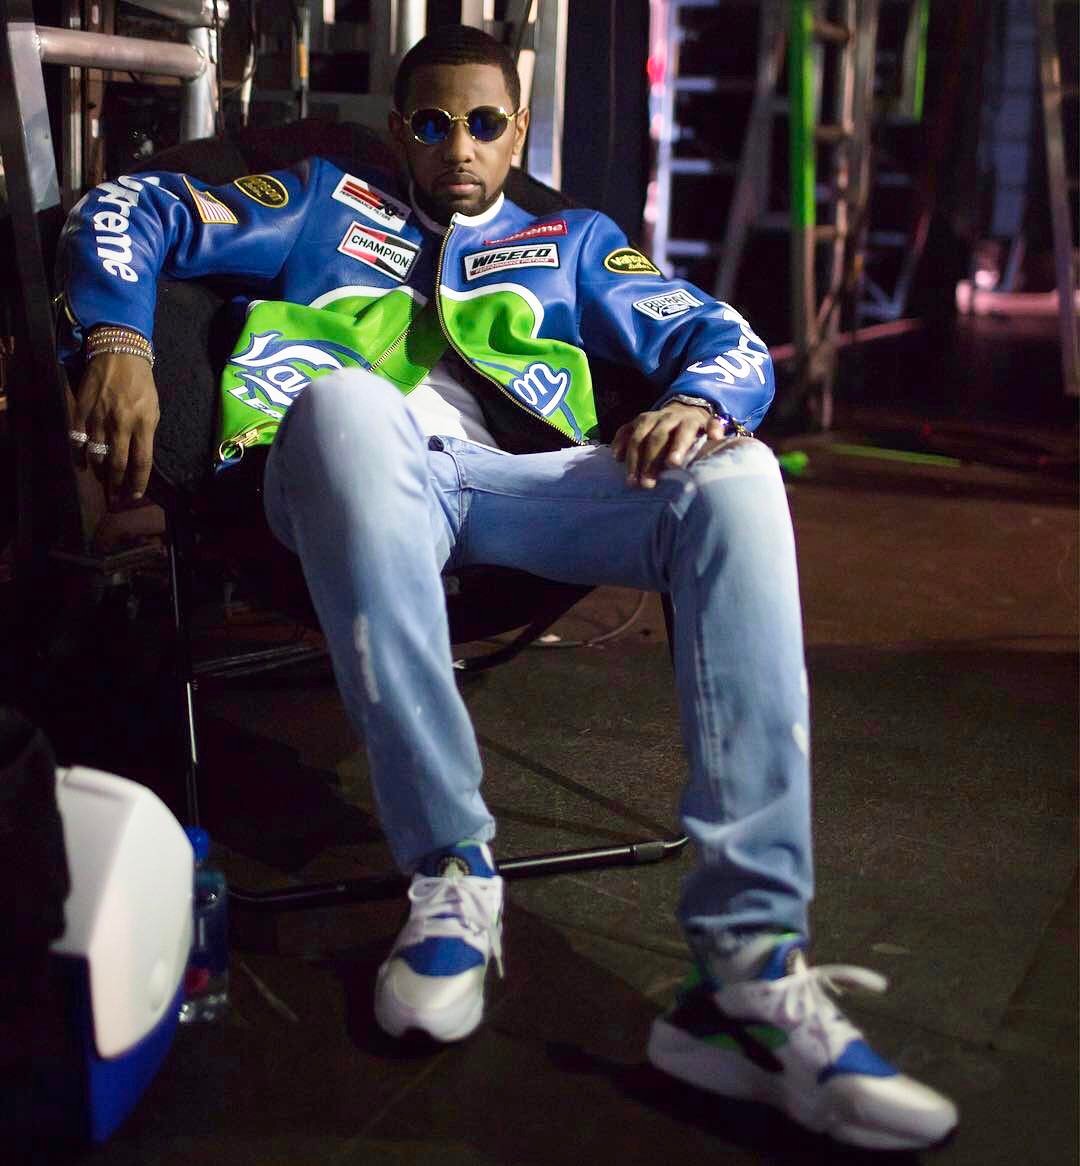 SPOTTED: Fabolous In Supreme x Vanson Leather Jacket And Nike Air Huarache Sneakers